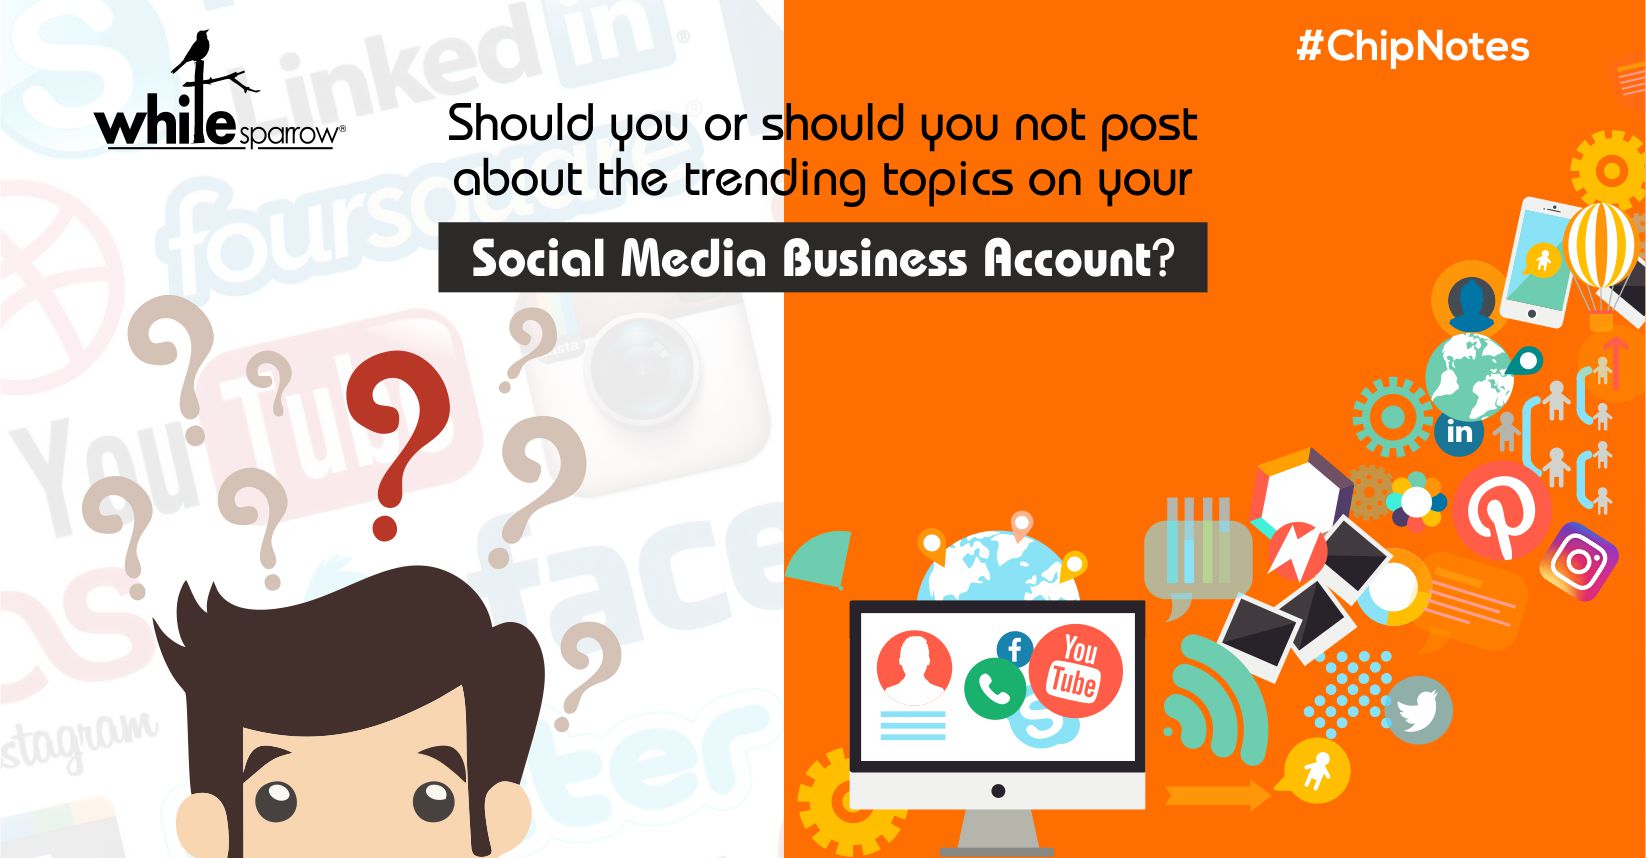 Should you or should you not post about the trending topics on your social media business account?